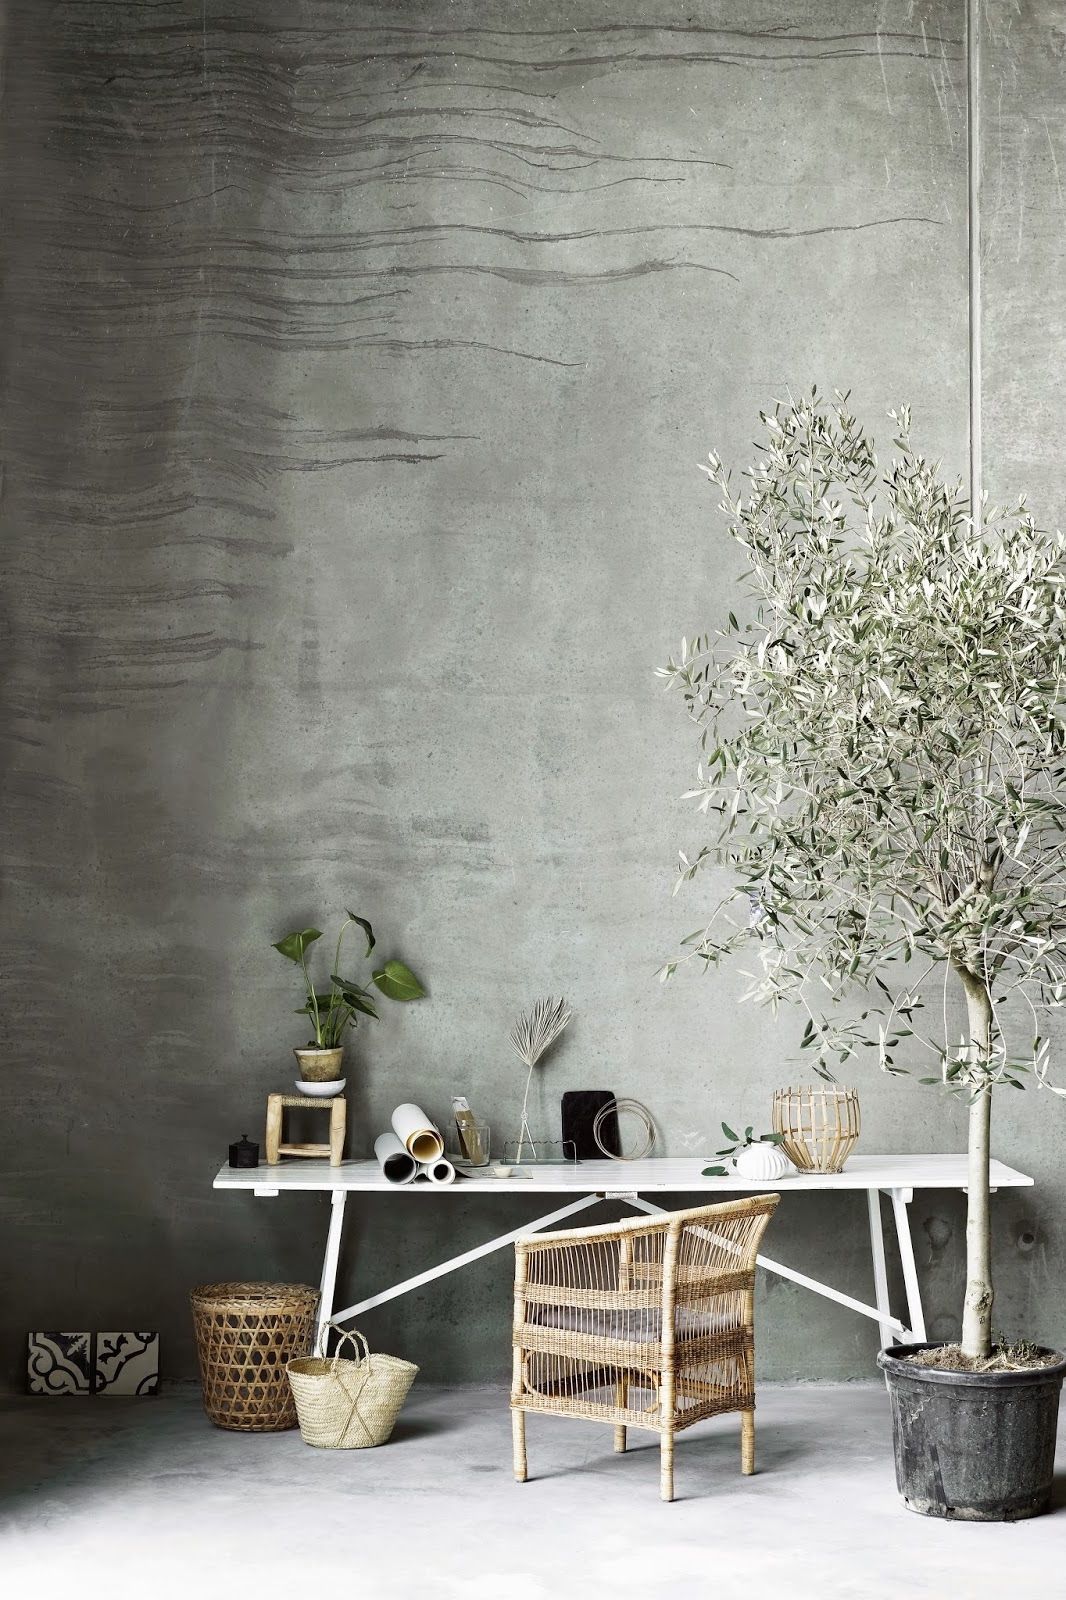 8 Types of Indoor Fruit Trees You Can Grow in Your Living Room